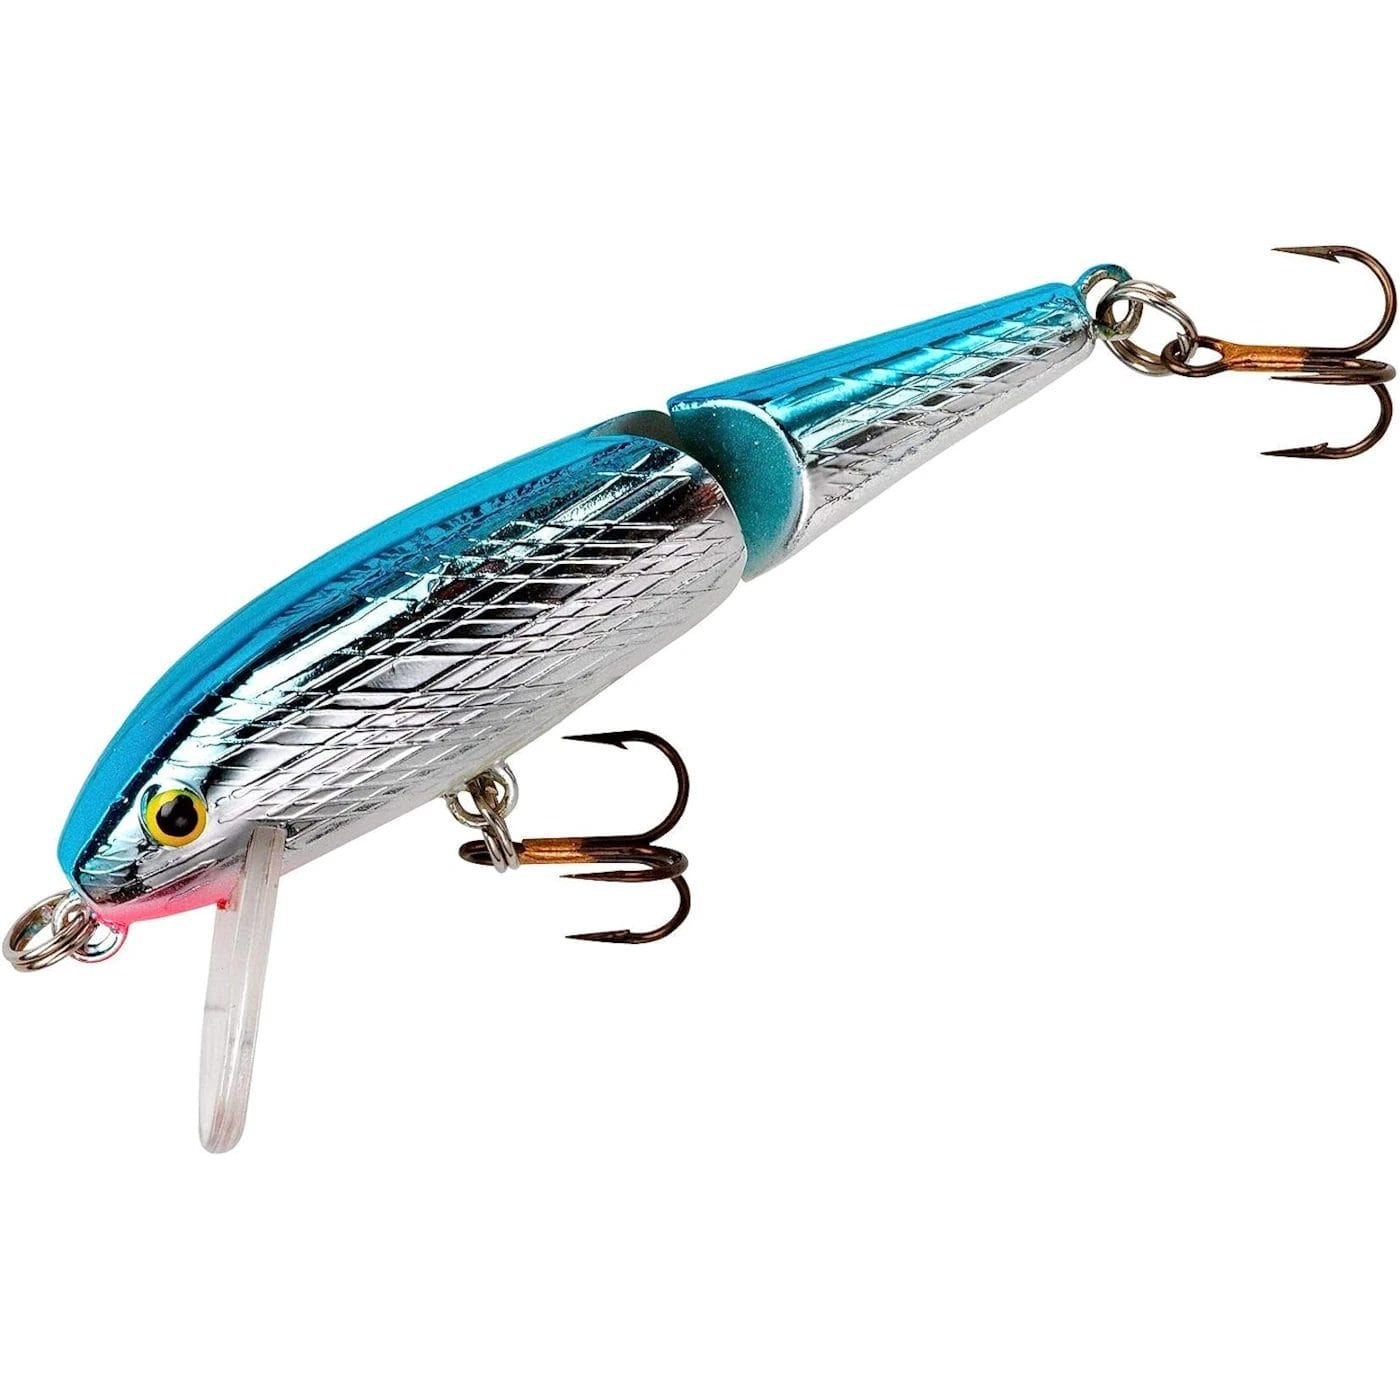 Rebel Minnow Jointed 1.875'' Tennessee Shad